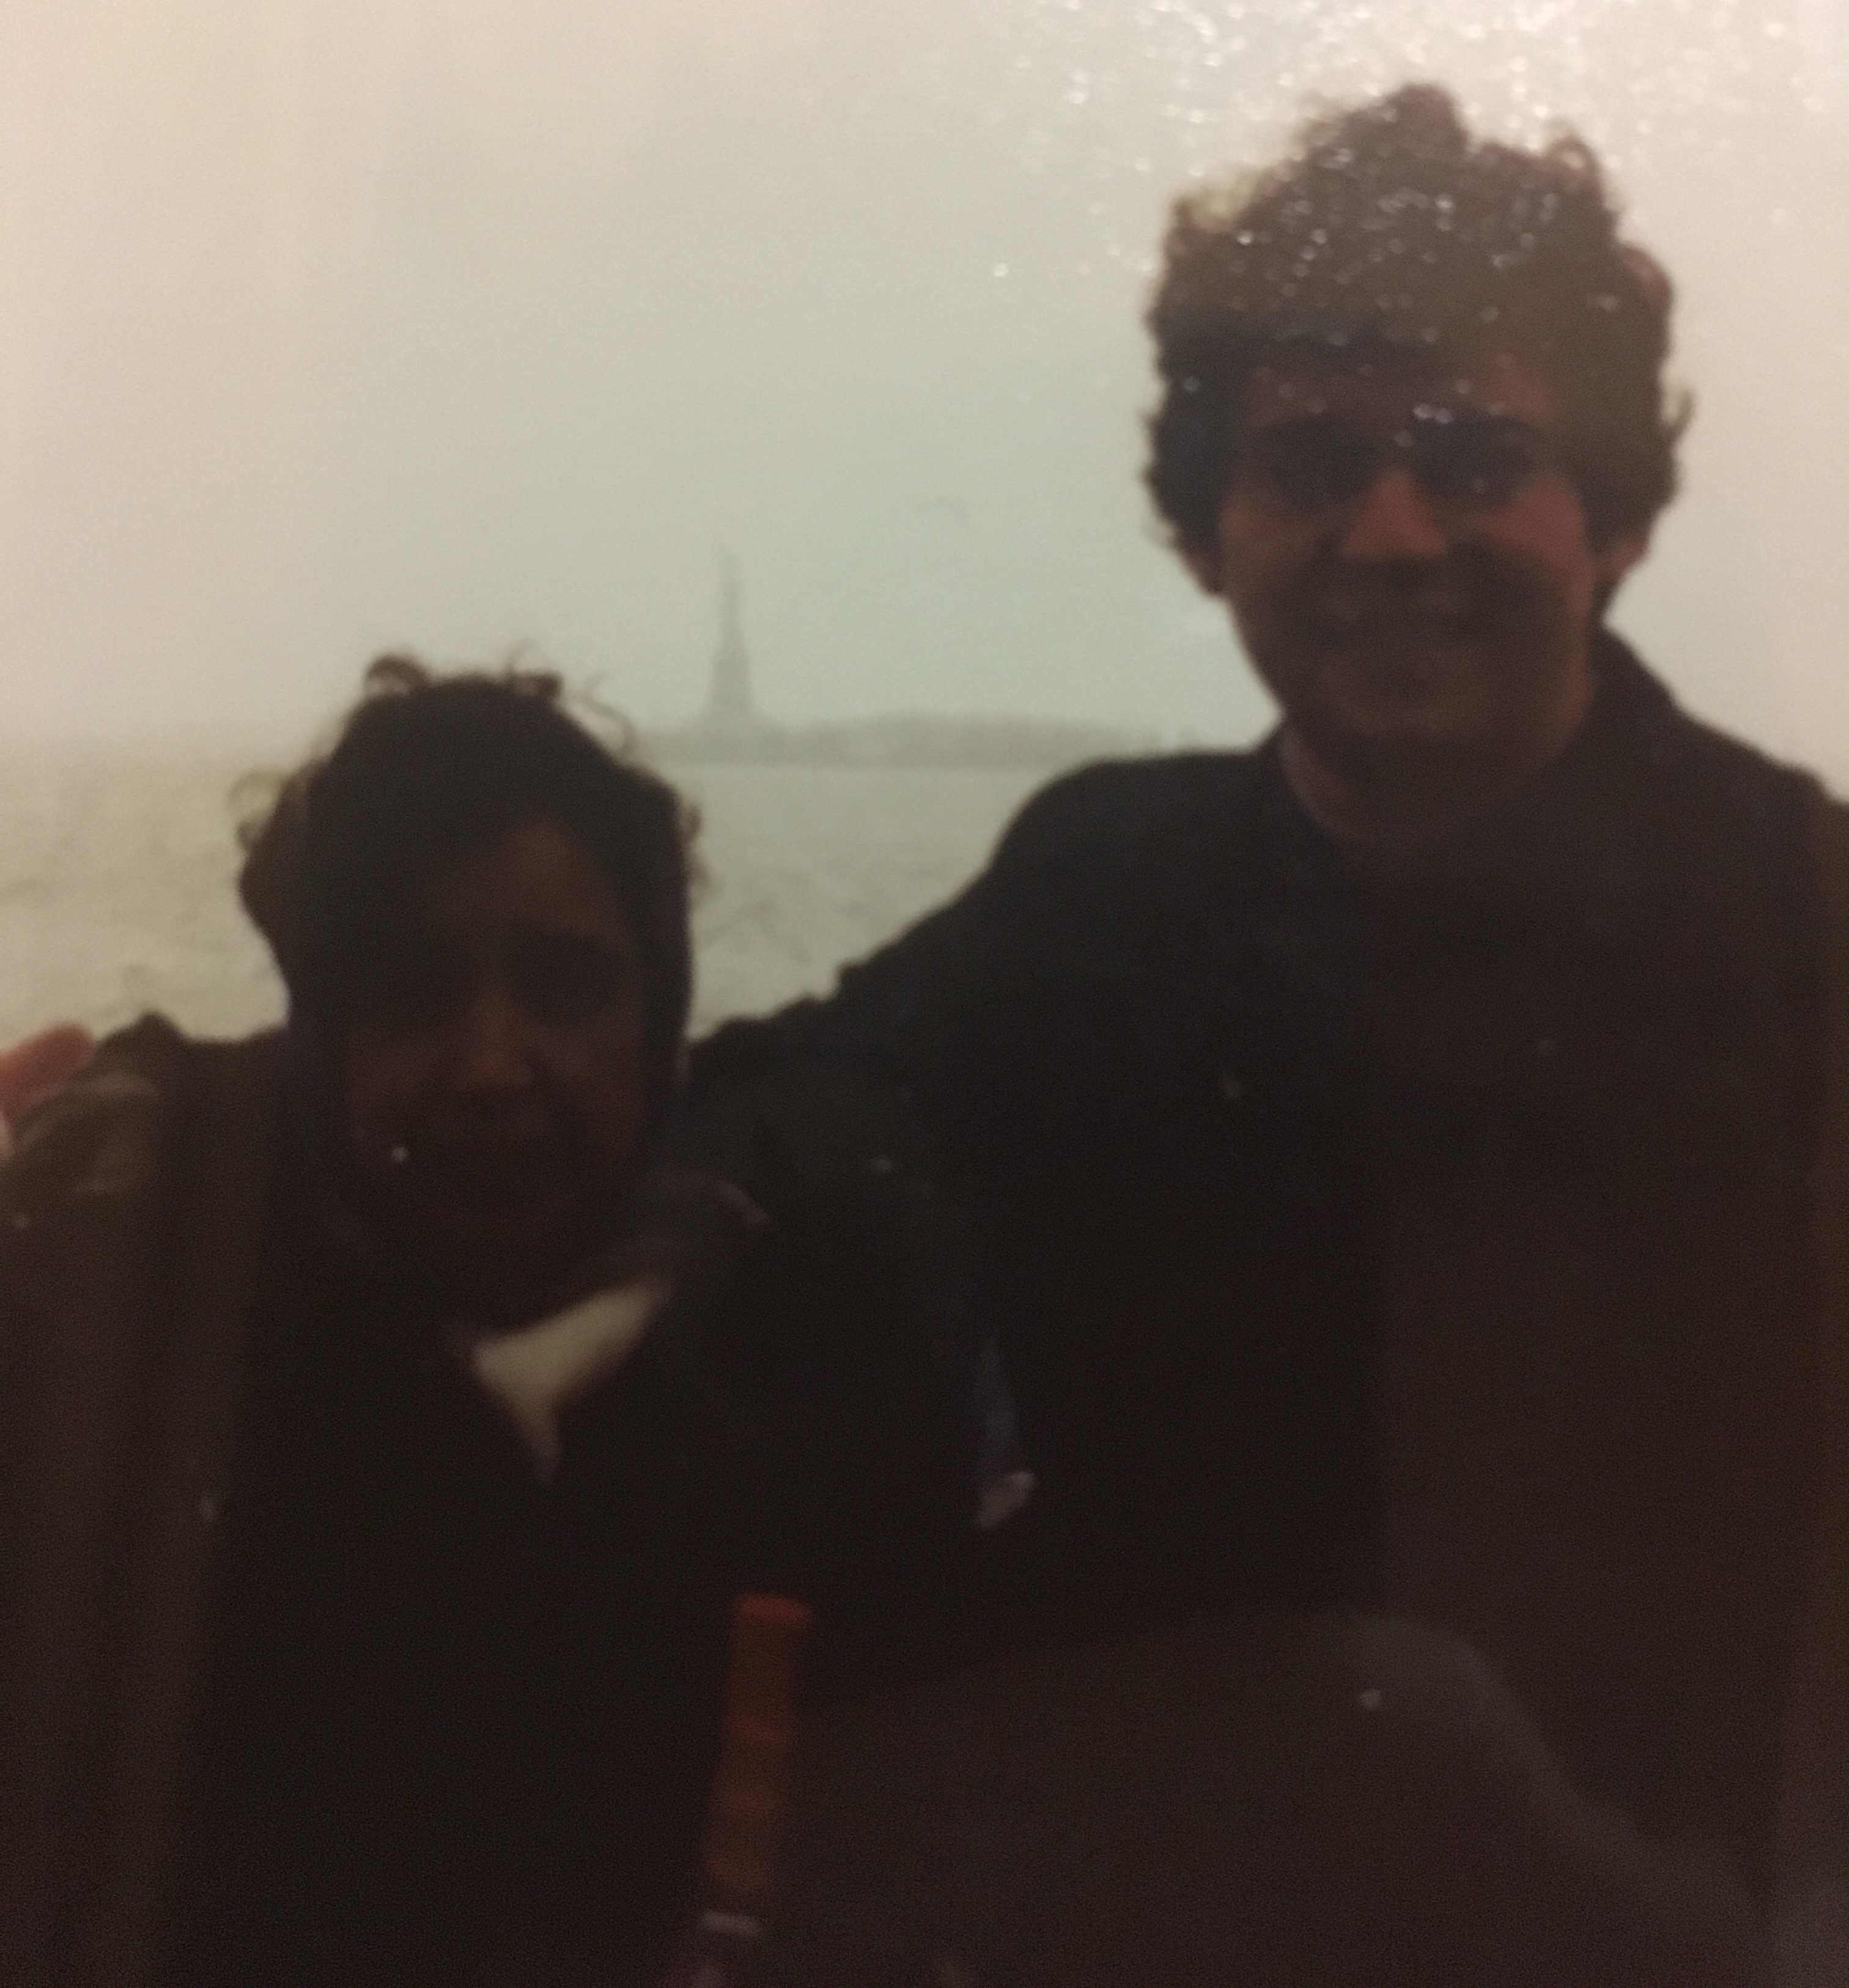 My grandmother and father at the Statue of Liberty in the early 1990s. My dad did not come to the United States by way of the New York Harbor. Nevertheless, to me, this picture still represents that he made it and that through his immigration story my own (still unborn) life as an American began.